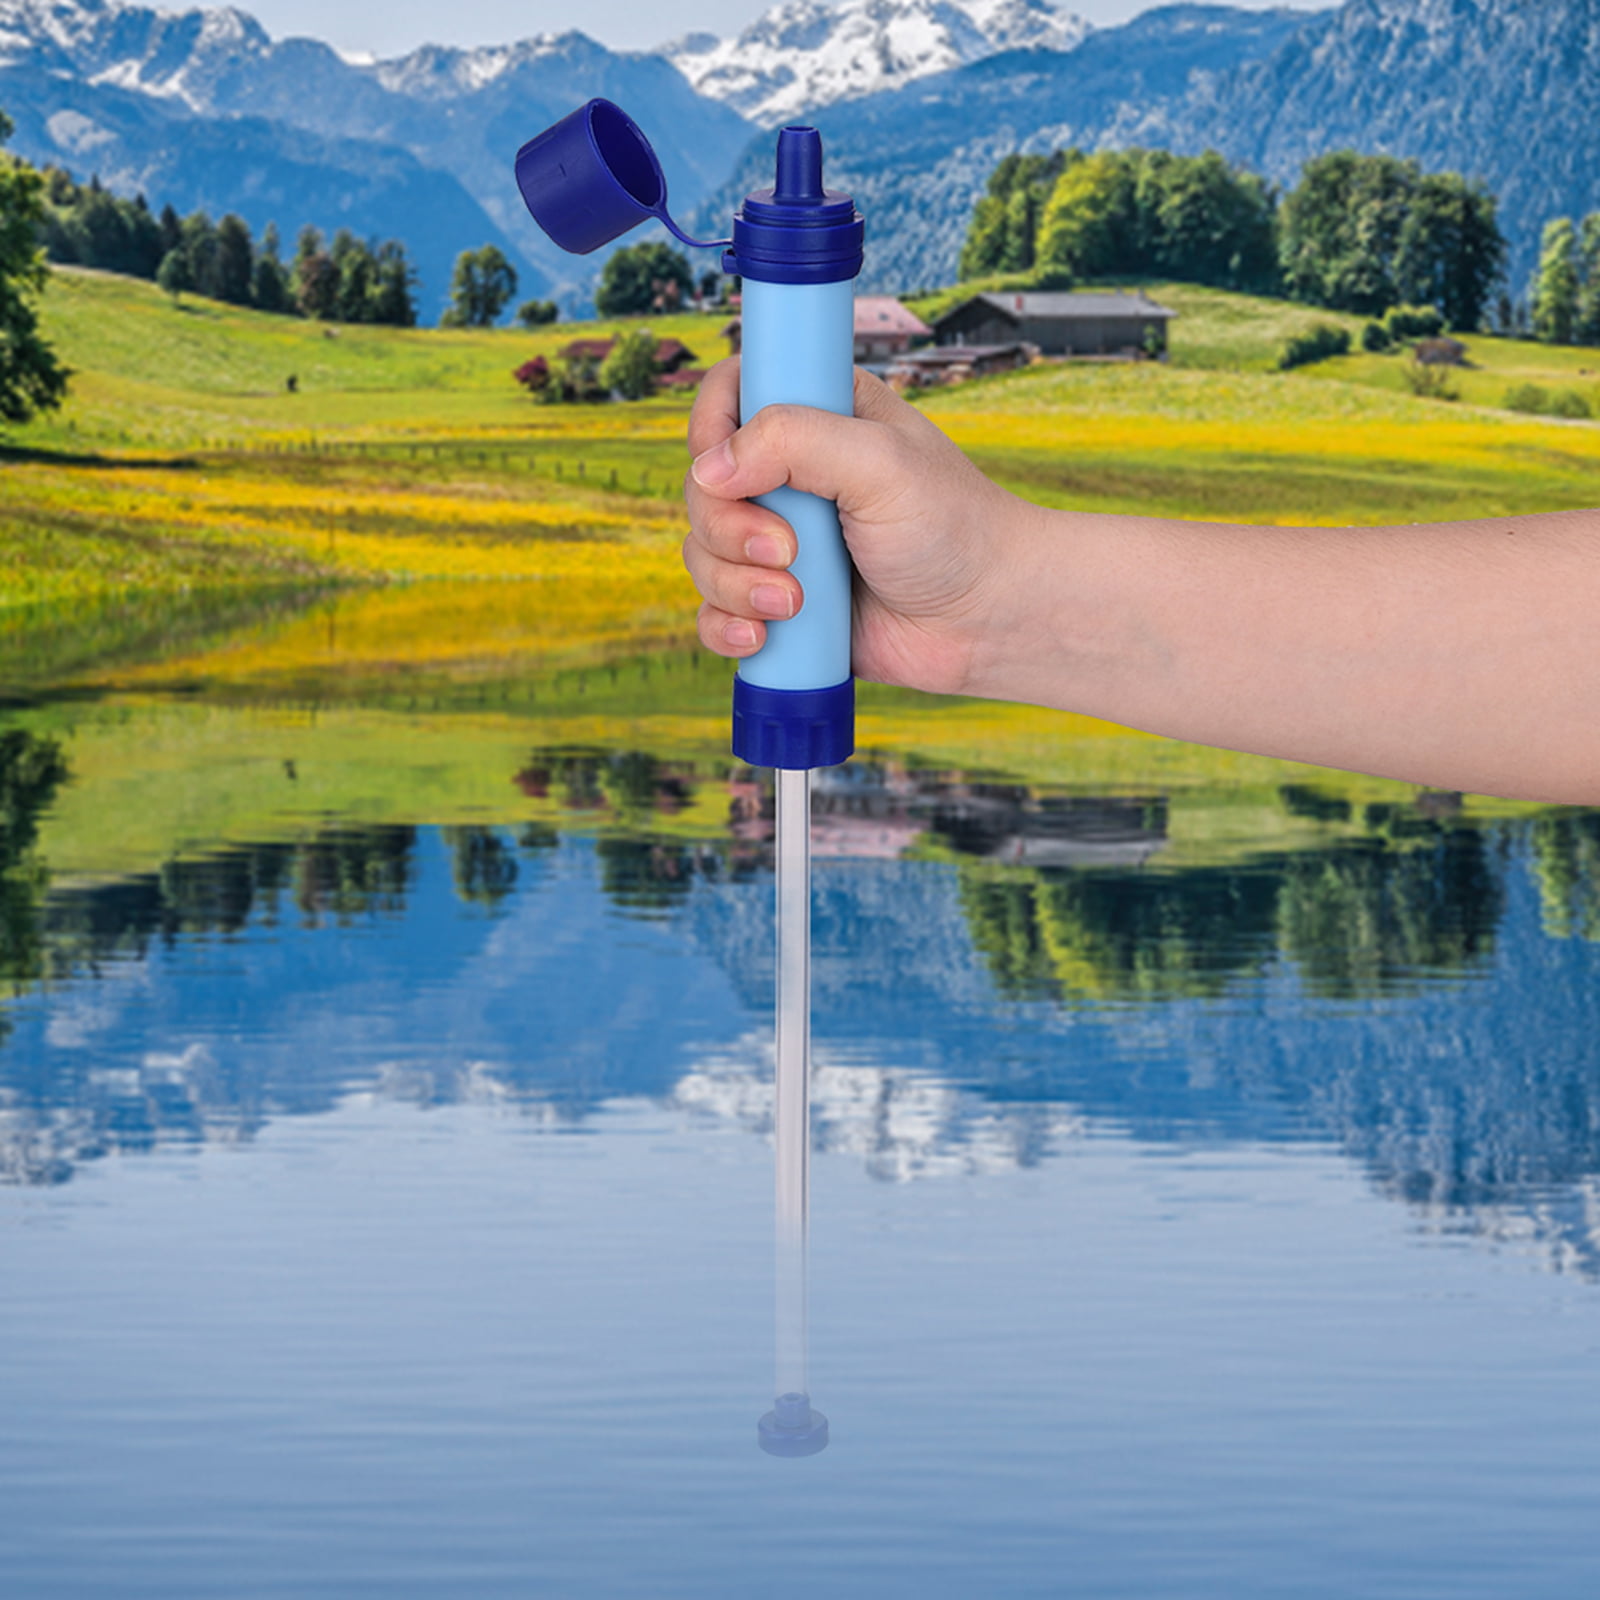 MODERN NEEDS Ready Filter - Personal Water Filter Straw - Water Filtration  System - Emergency Water - Water Purification for Survival, Outdoor